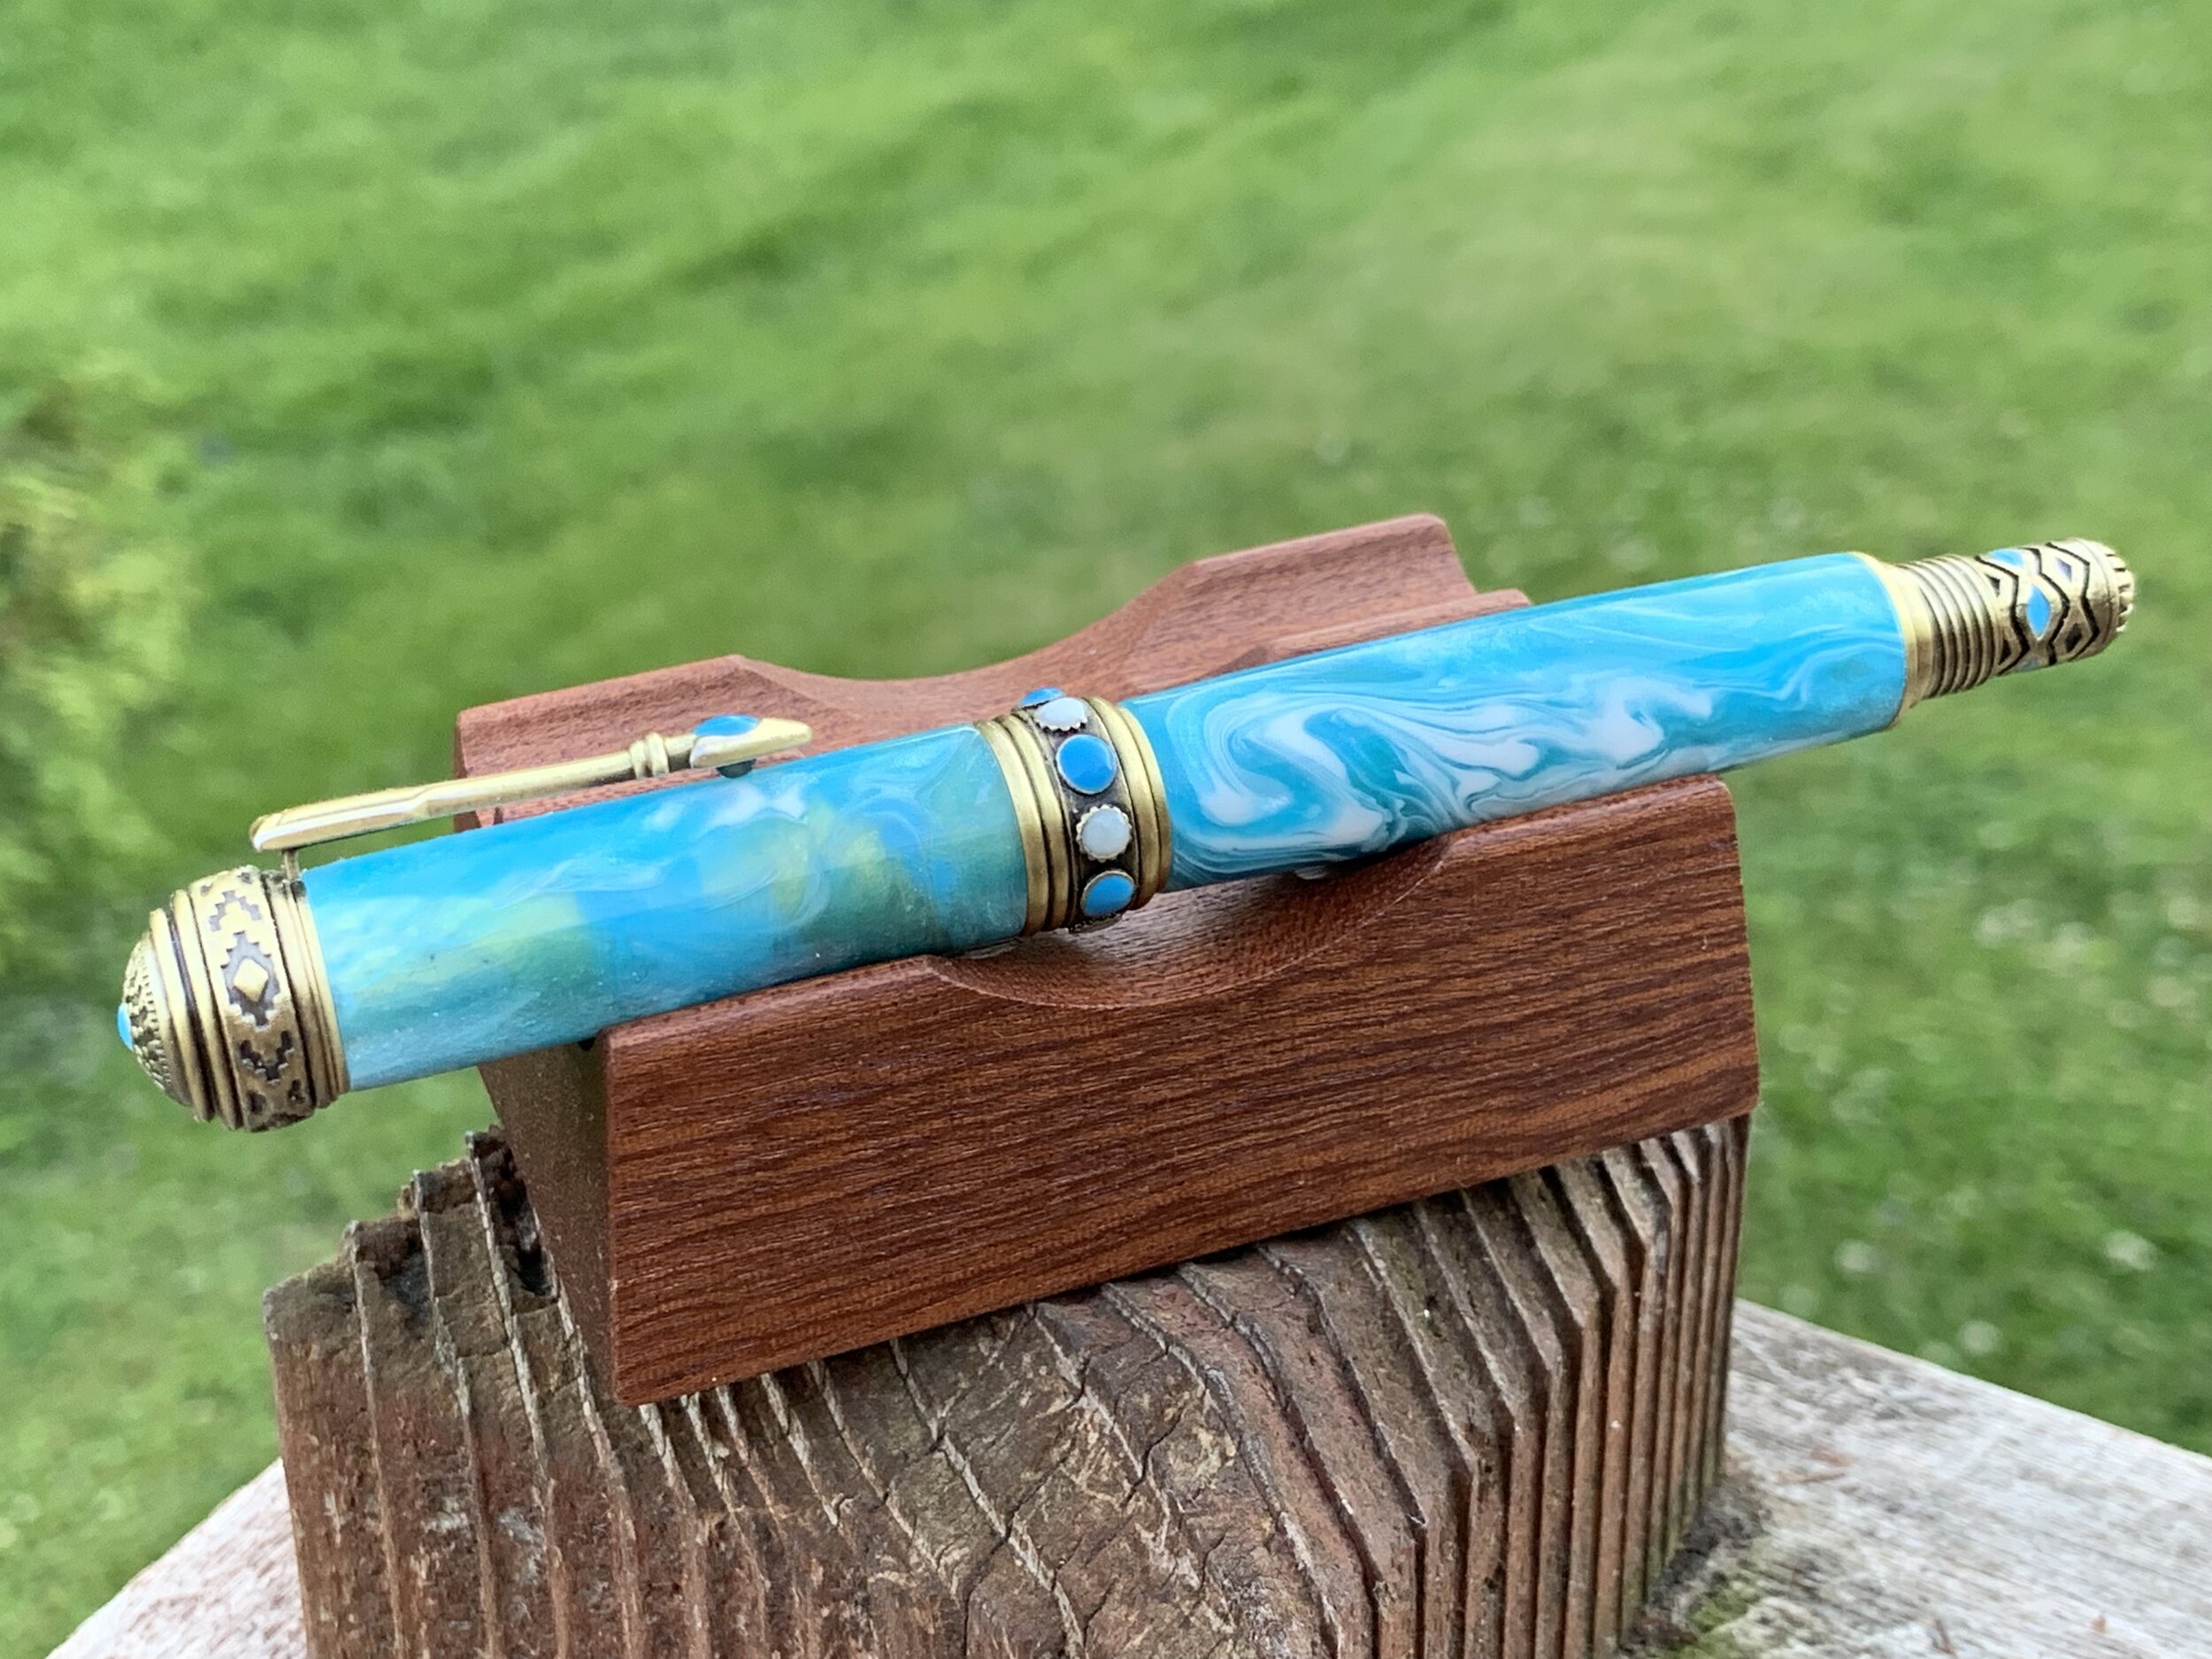 Southwest Rollerball - $60 - SOLD